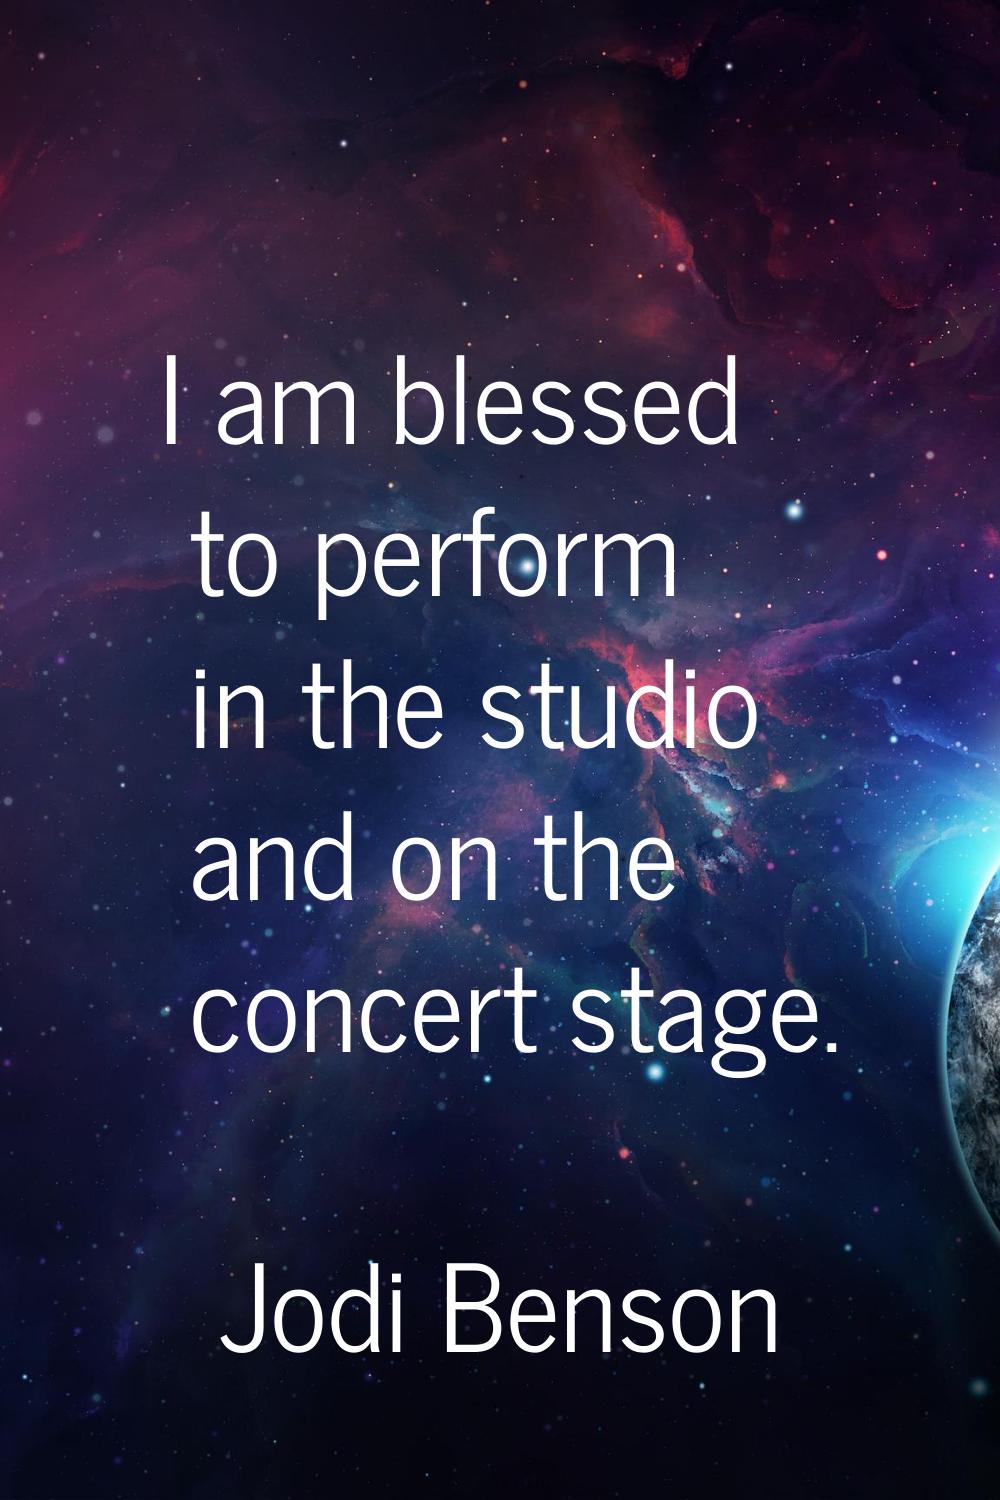 I am blessed to perform in the studio and on the concert stage.